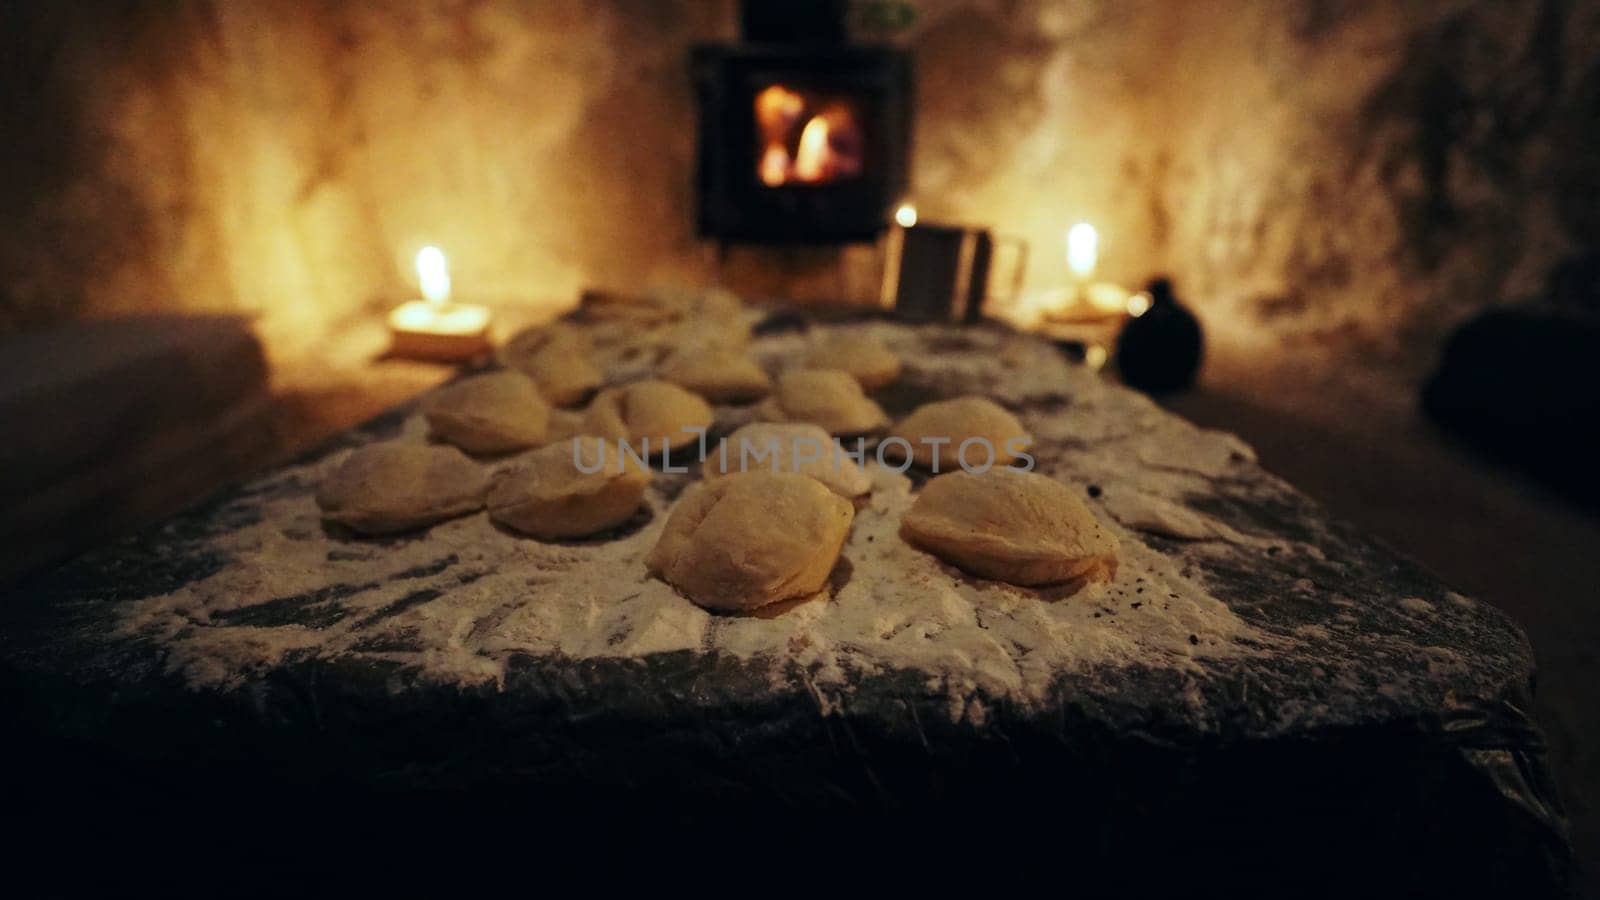 We made dumplings in field conditions. Cooking in an unusual place, in an old hut. There is a fire burning in the camp stove, candles next to the old walls. There are molded dumplings in flour